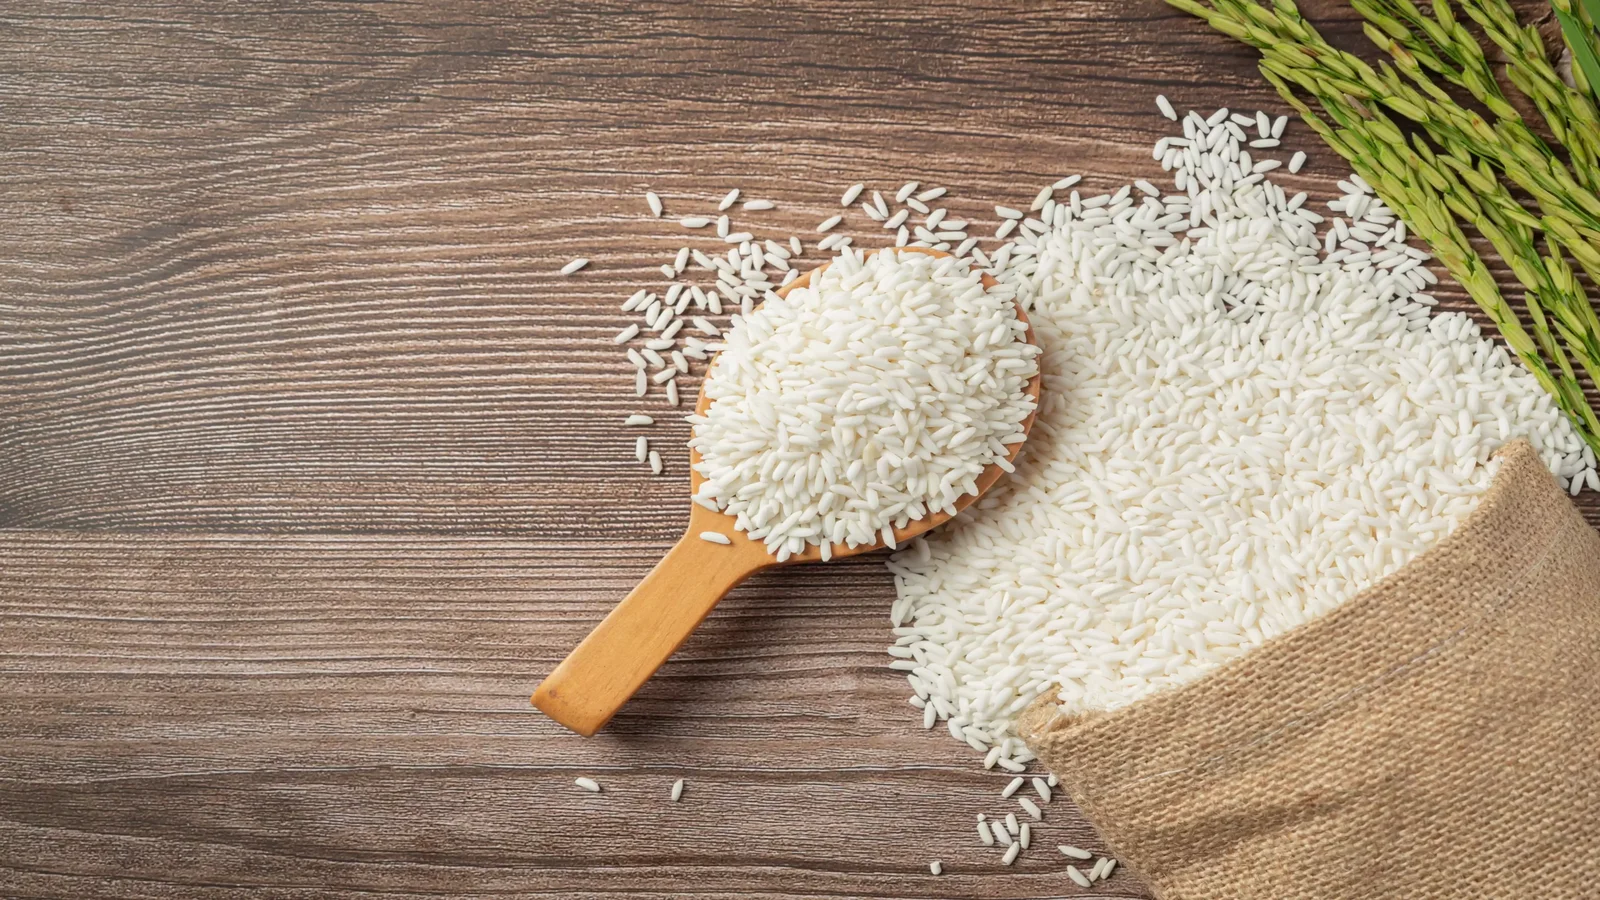 Rice and sugar prices defy August’s decline in food commodities: FAO